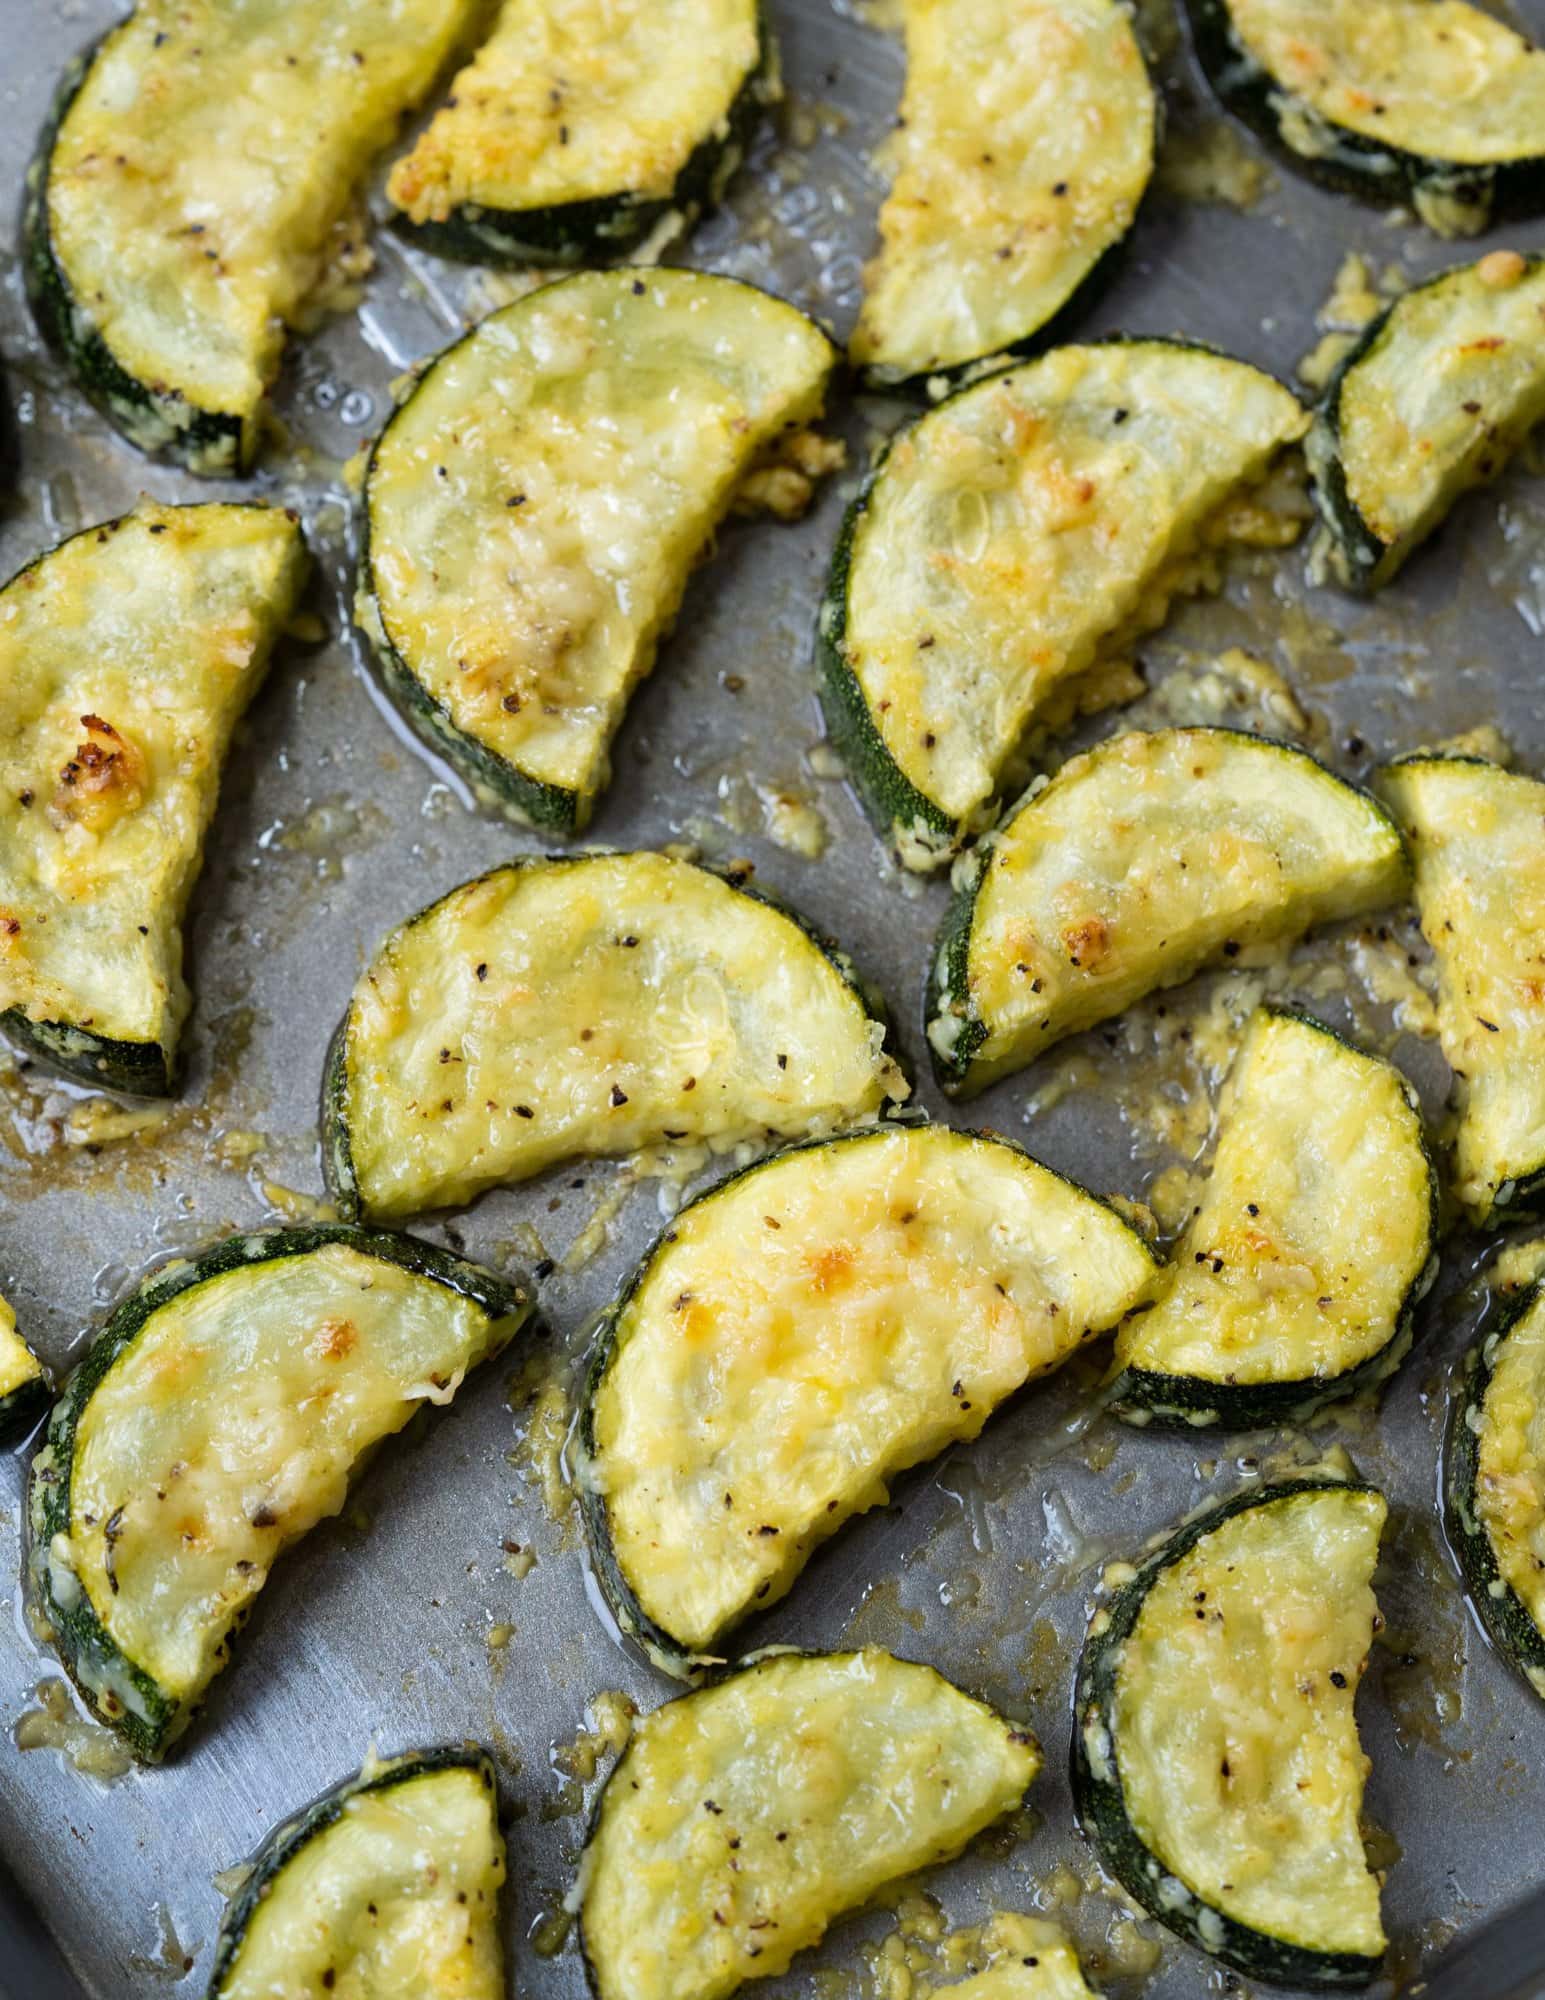 Parmesan coated roasted zucchini in oven on a tray.